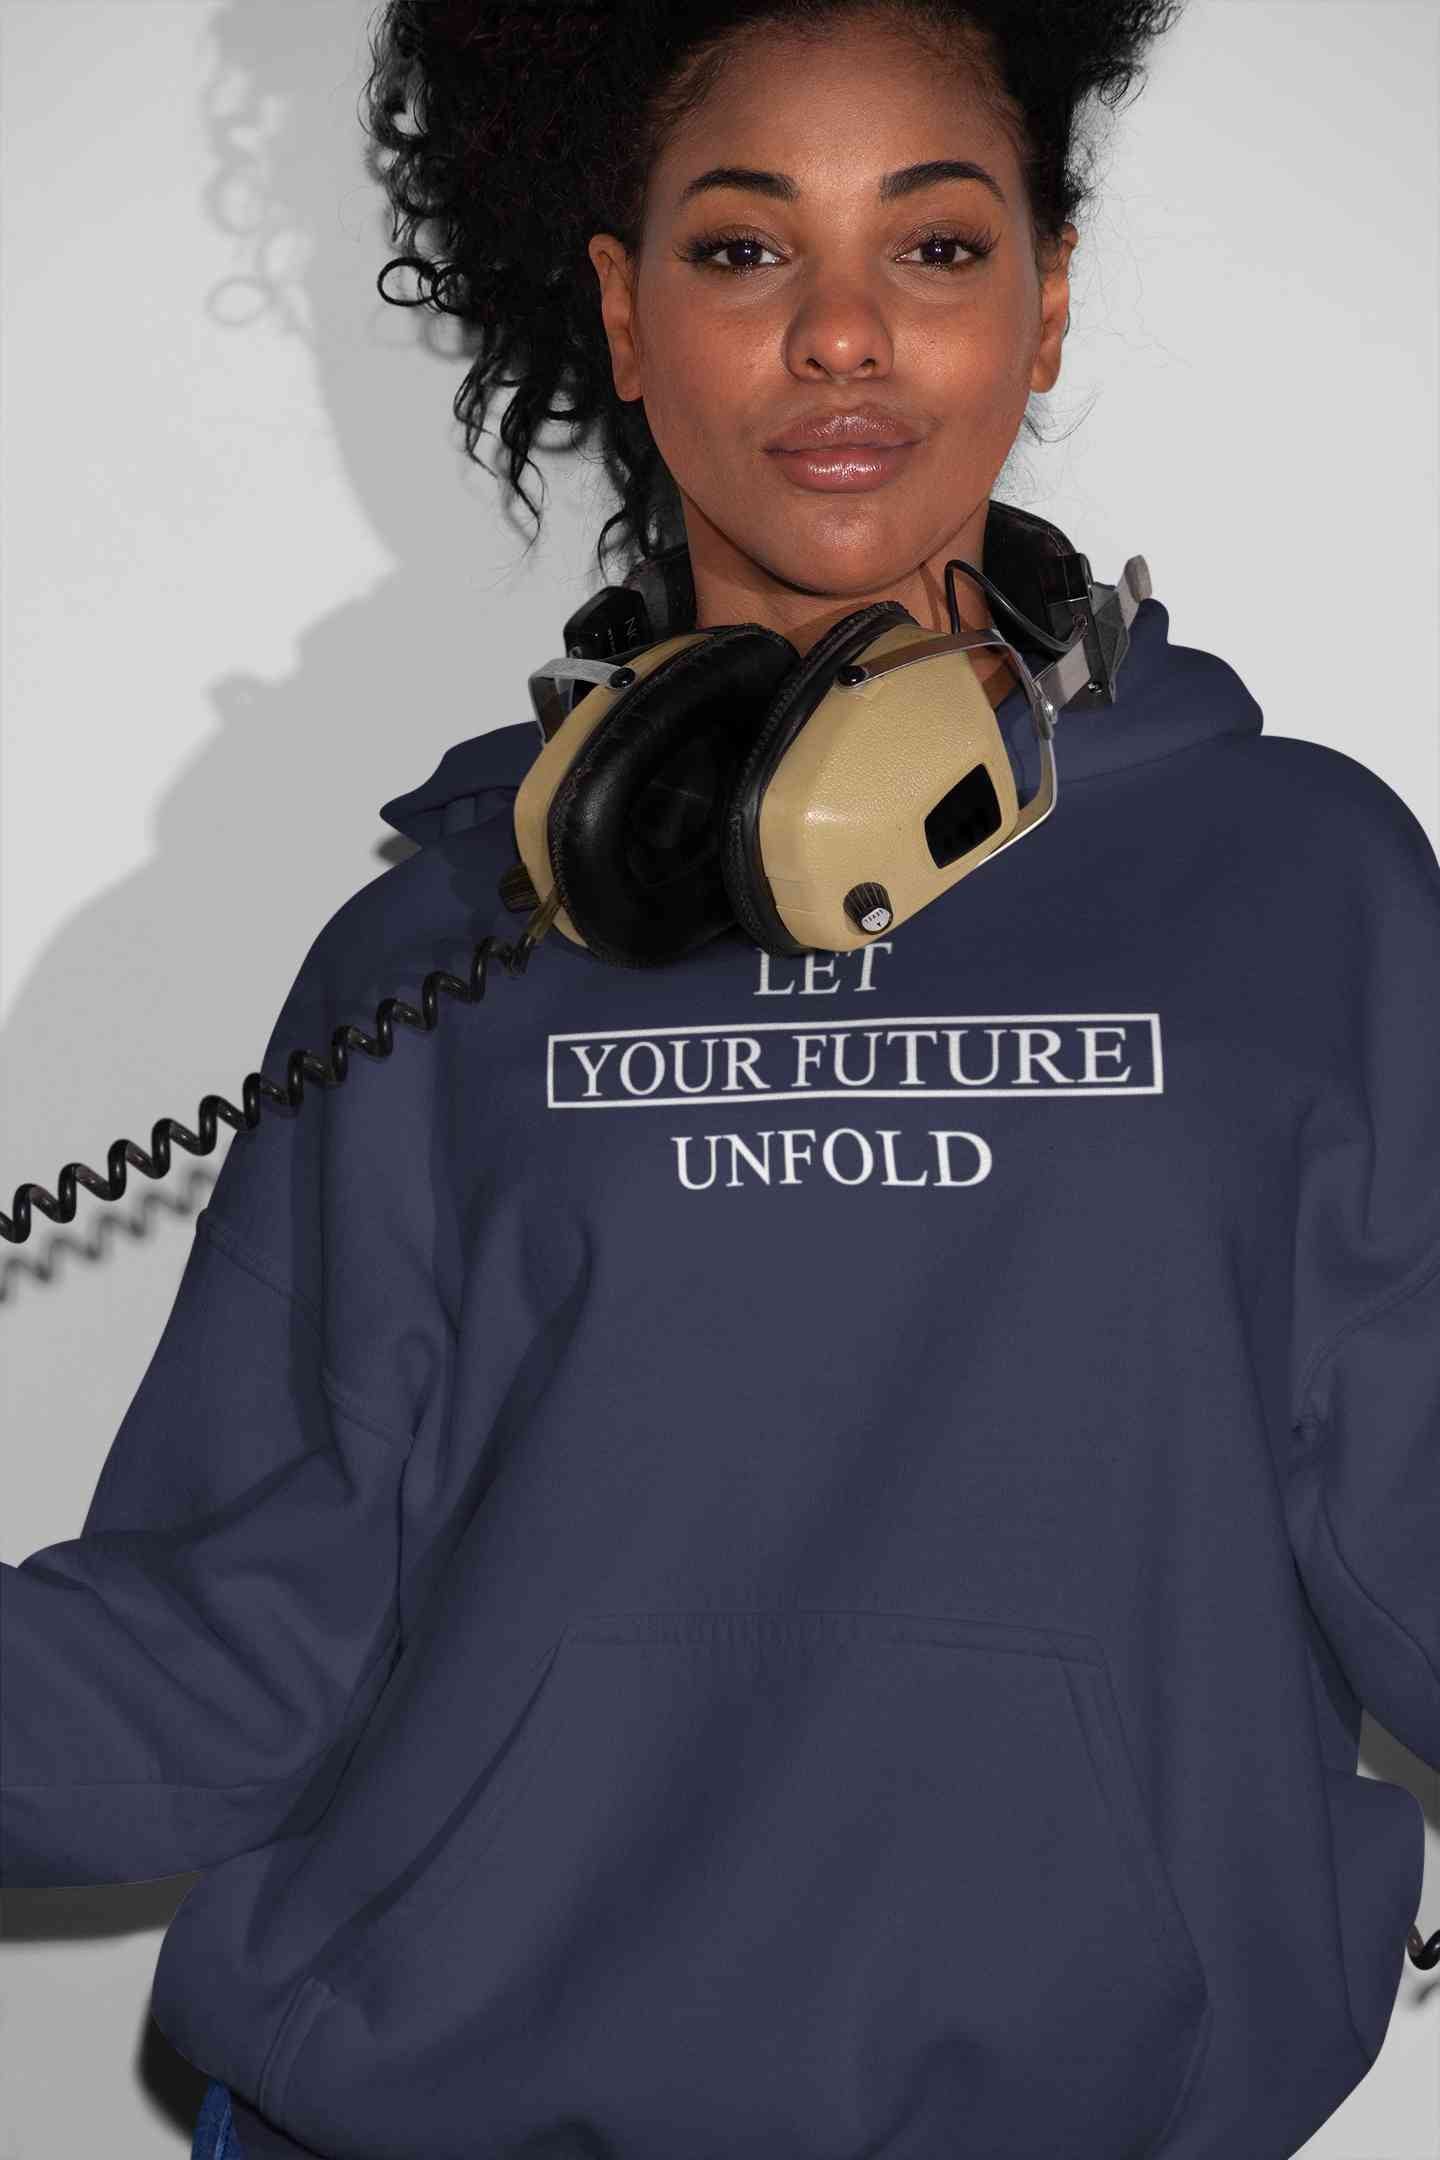 Let Your Future Unfold Typography Hoodies for Women-FunkyTeesClub